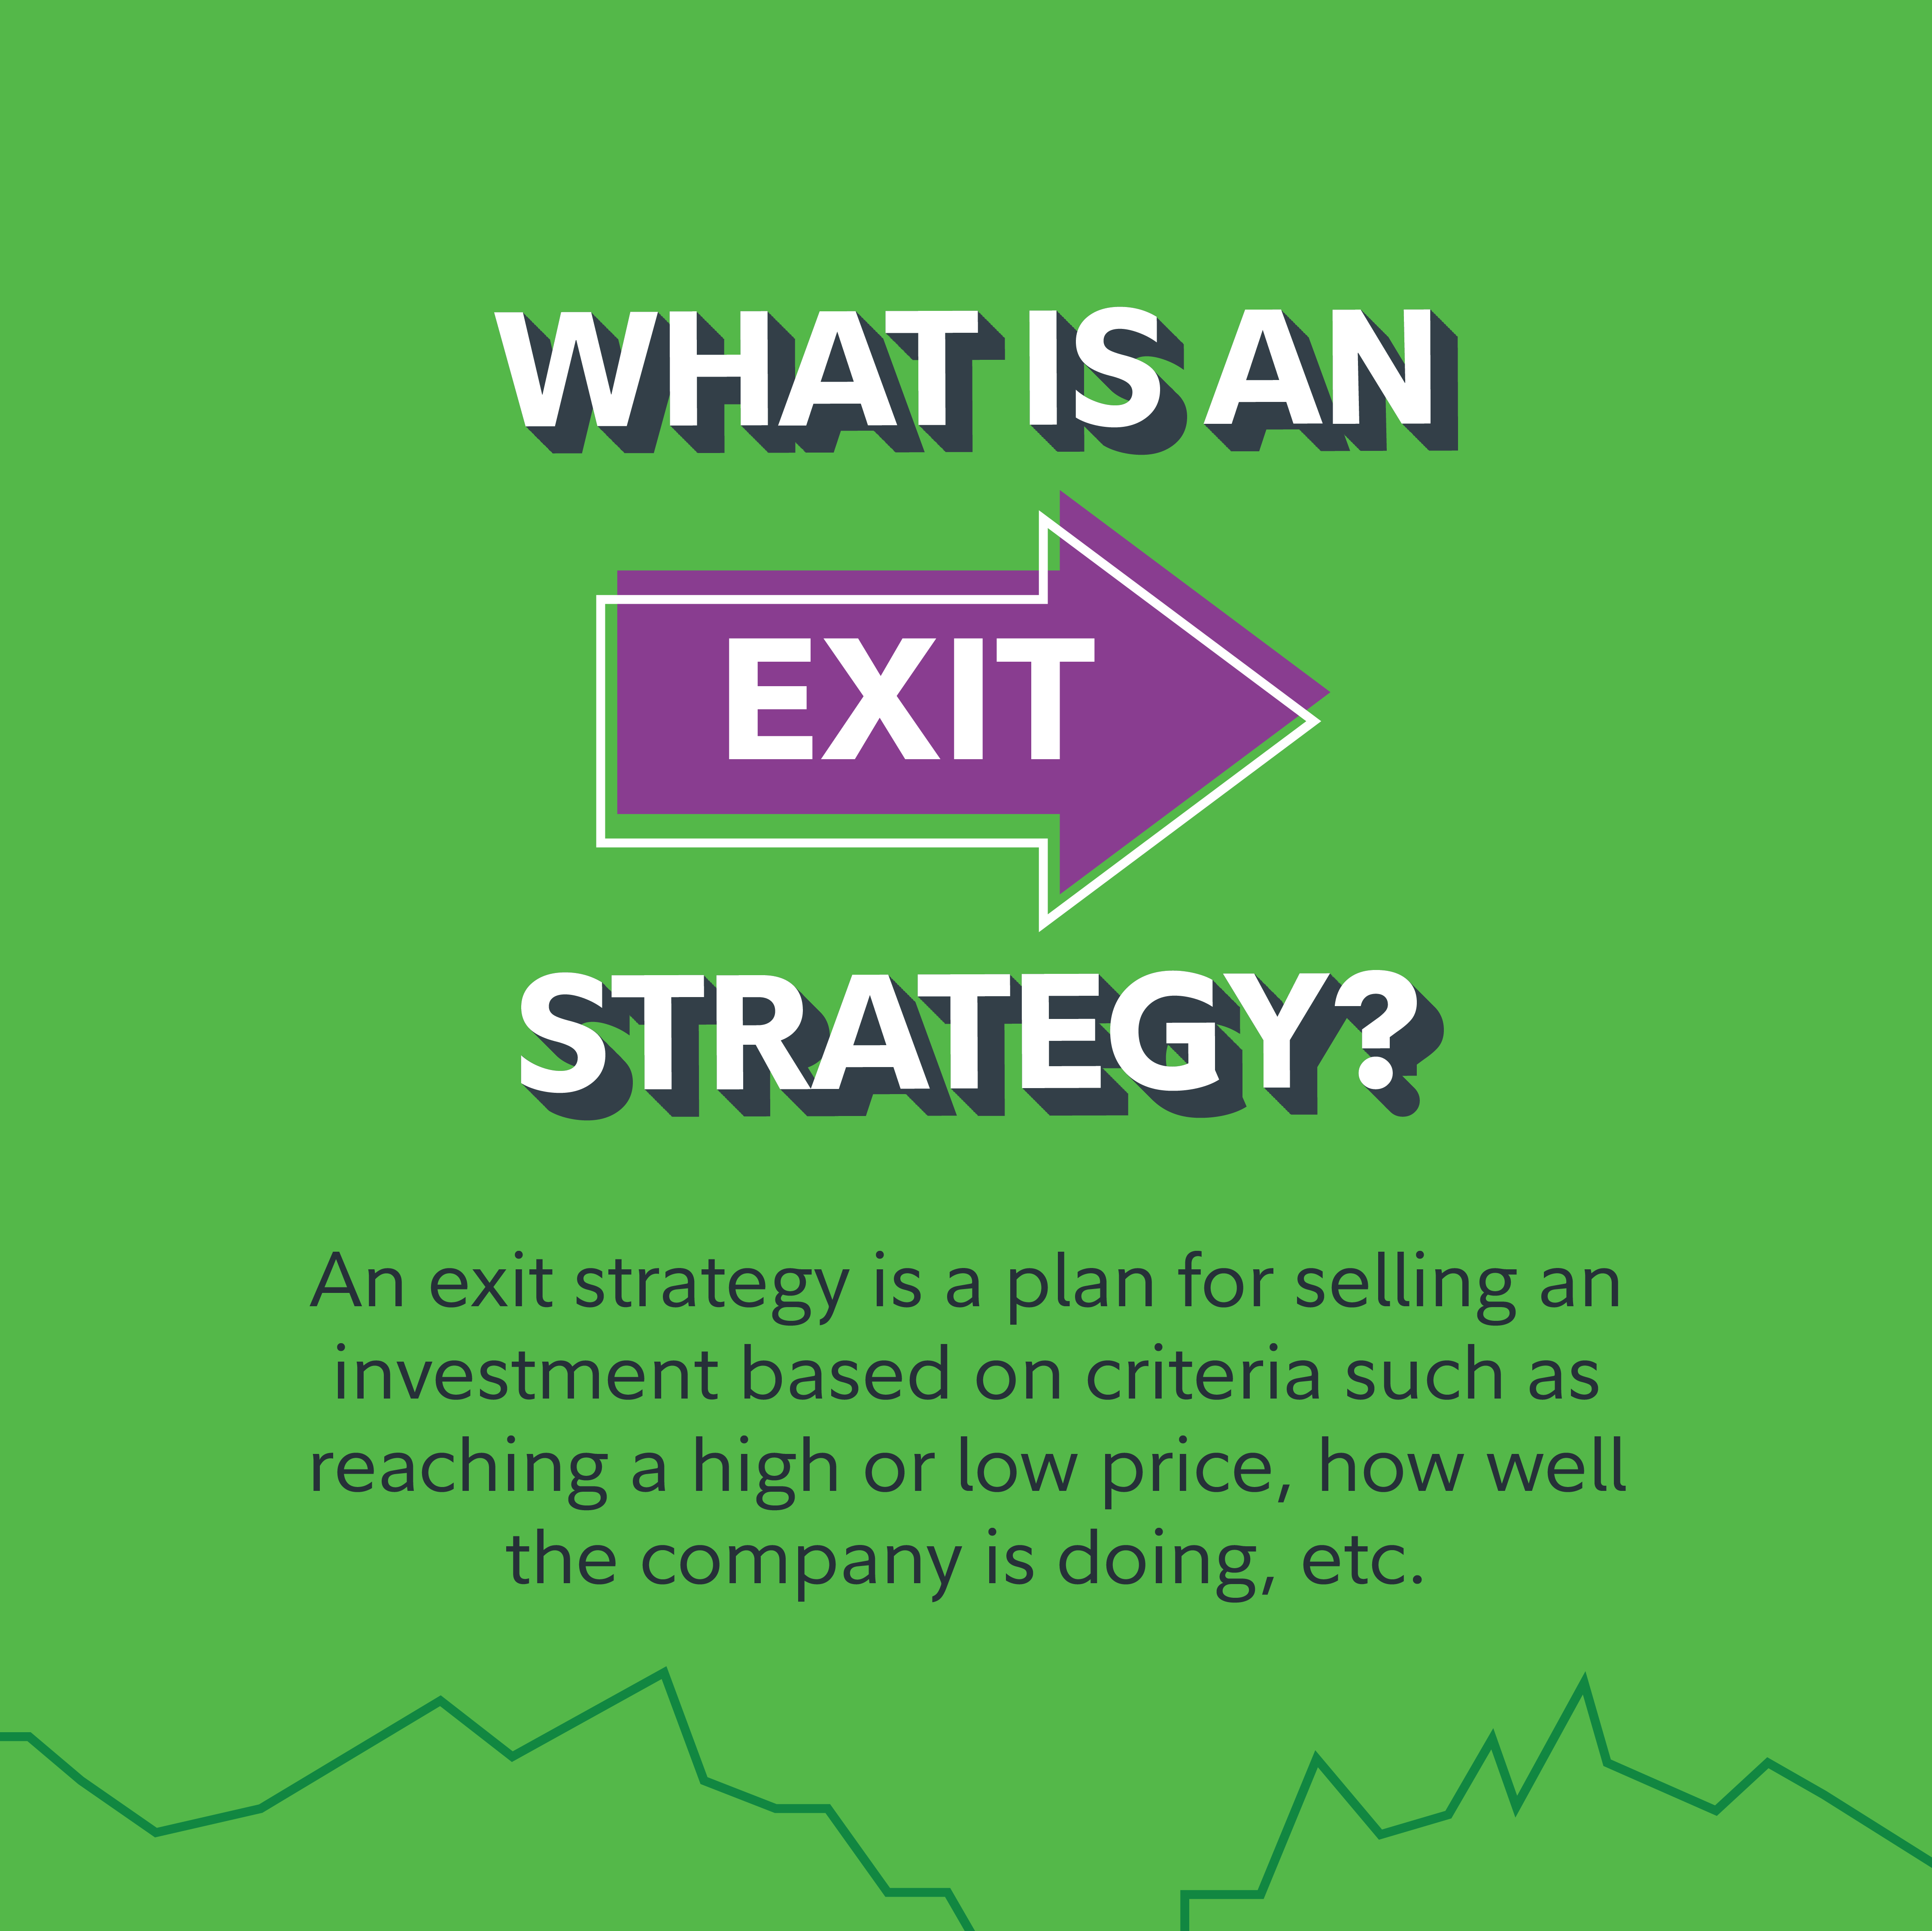 What is an exit strategy? An exit strategy is a plan for selling an investment based on criteria such as reaching a high or low price, how well the company is doing, etc.